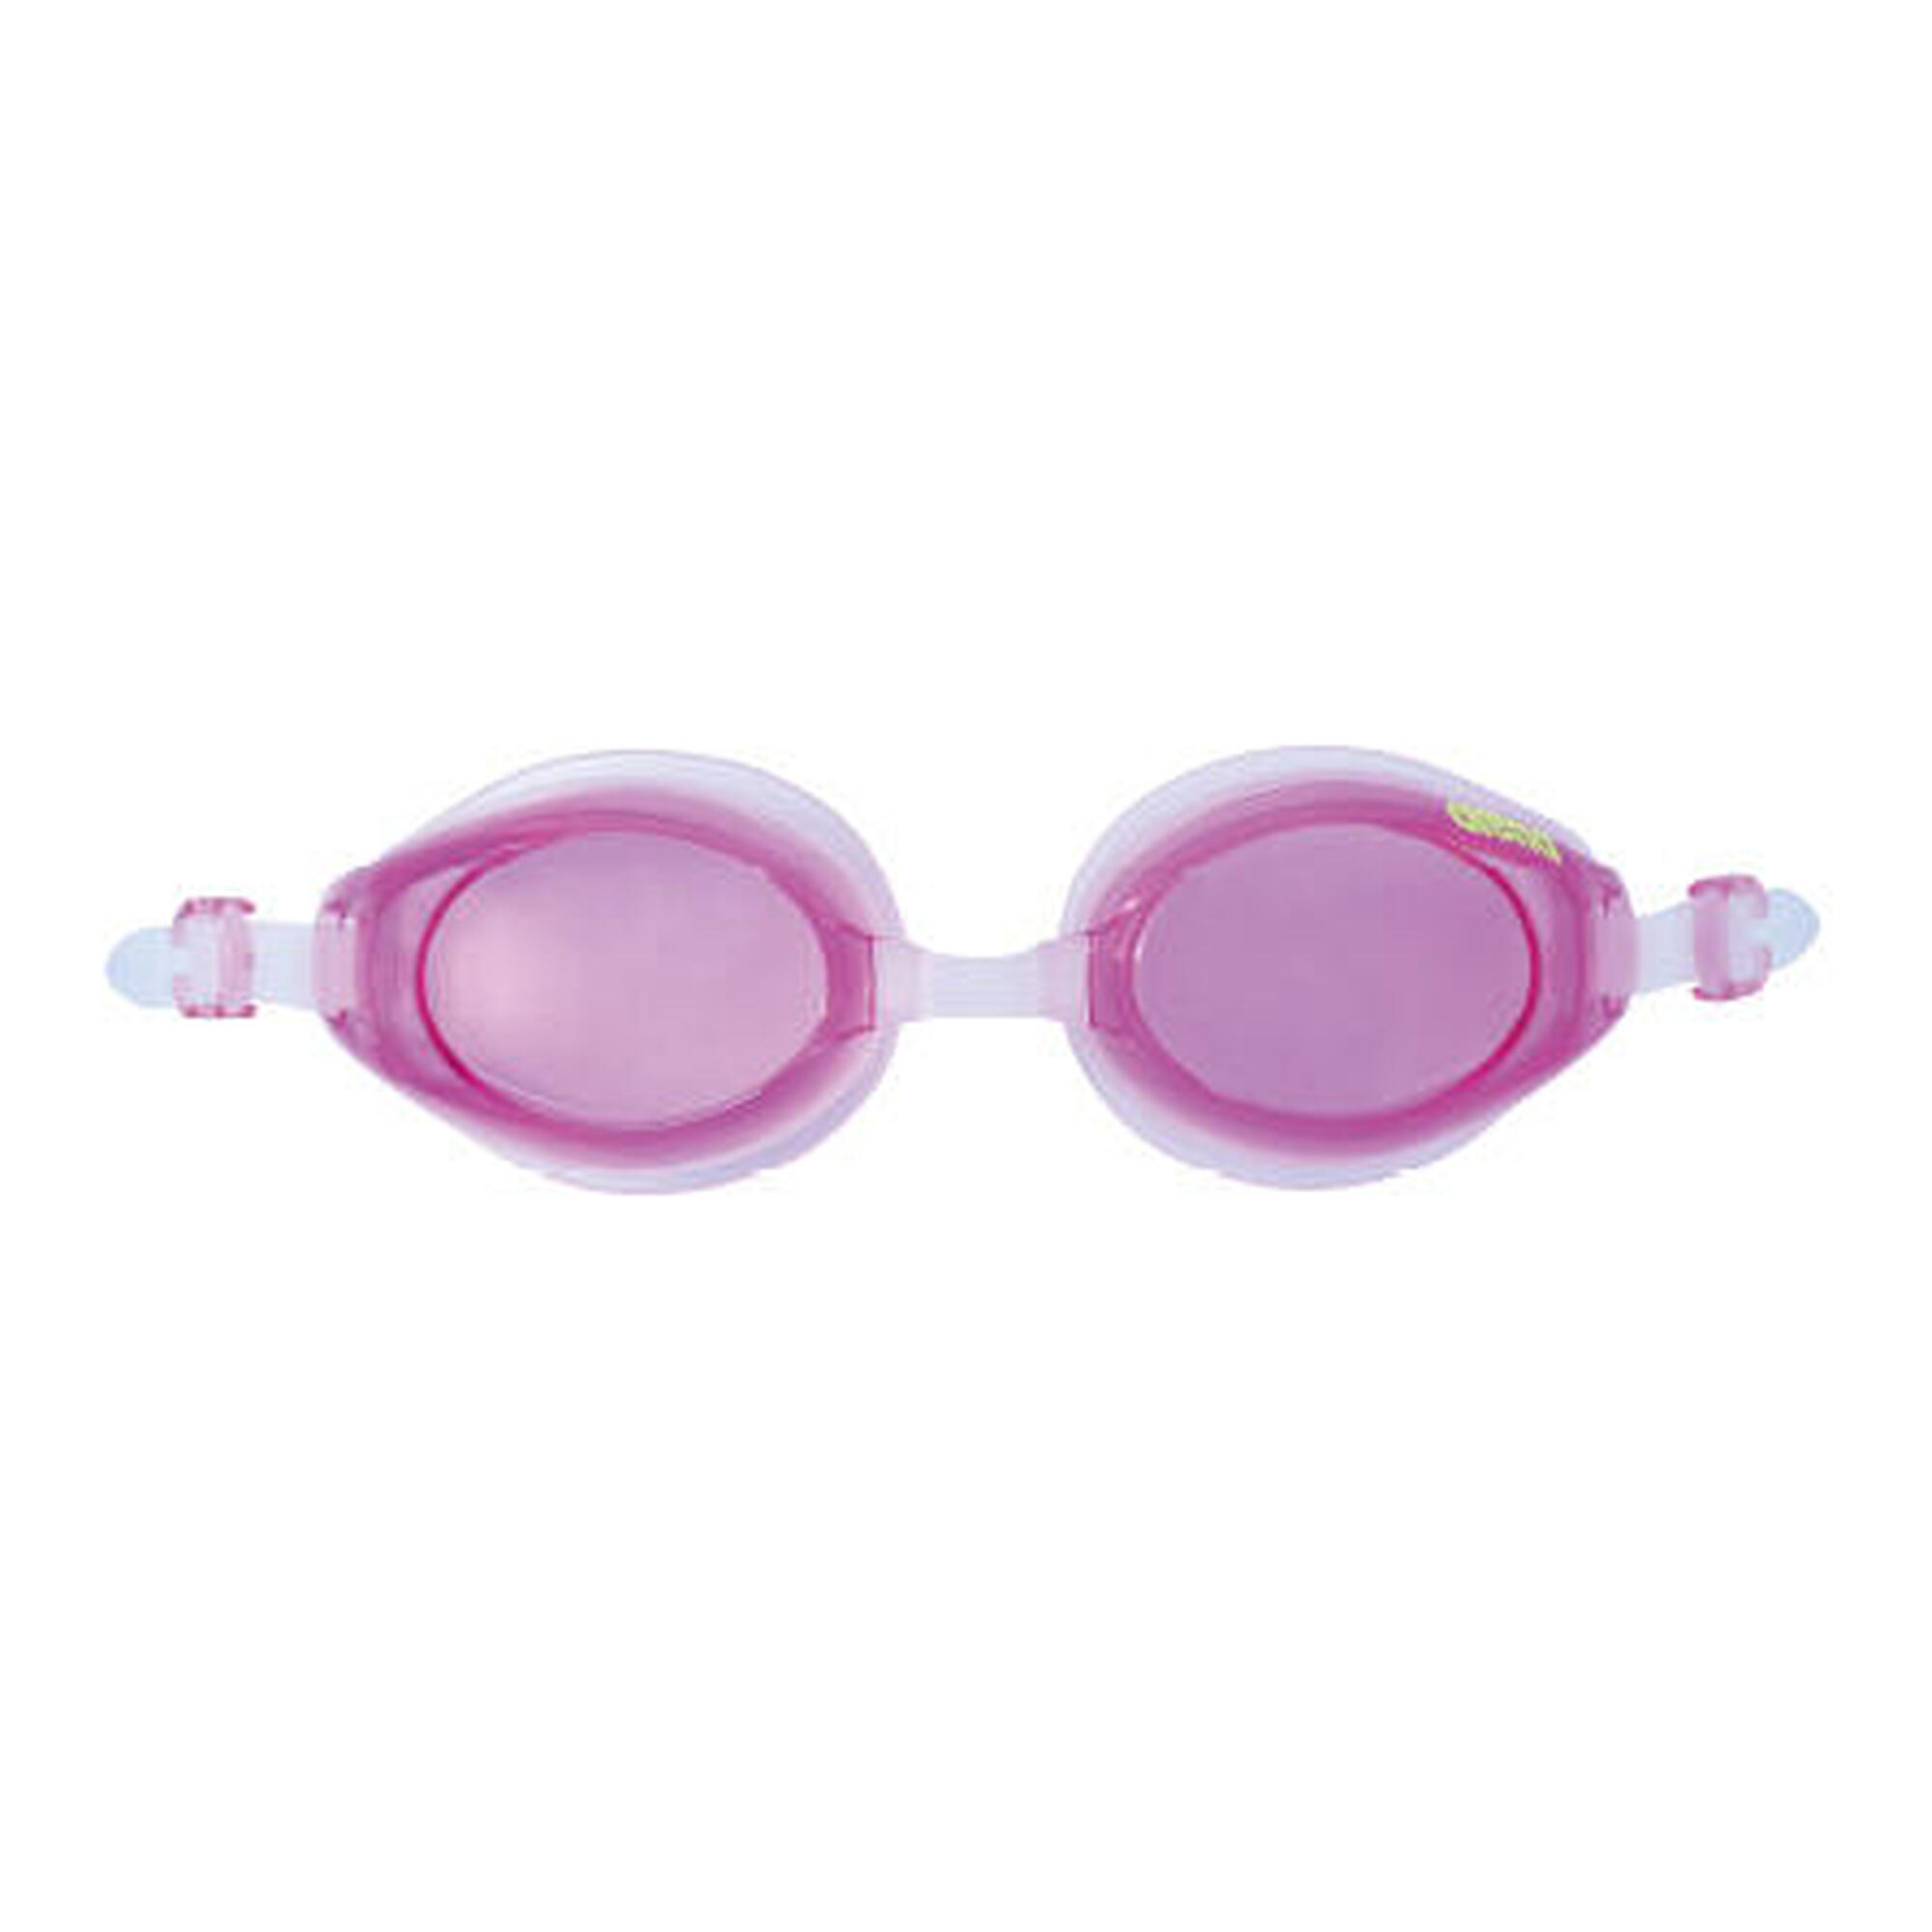 JAPAN MADE WIDE VISION GOGGLE - PINK